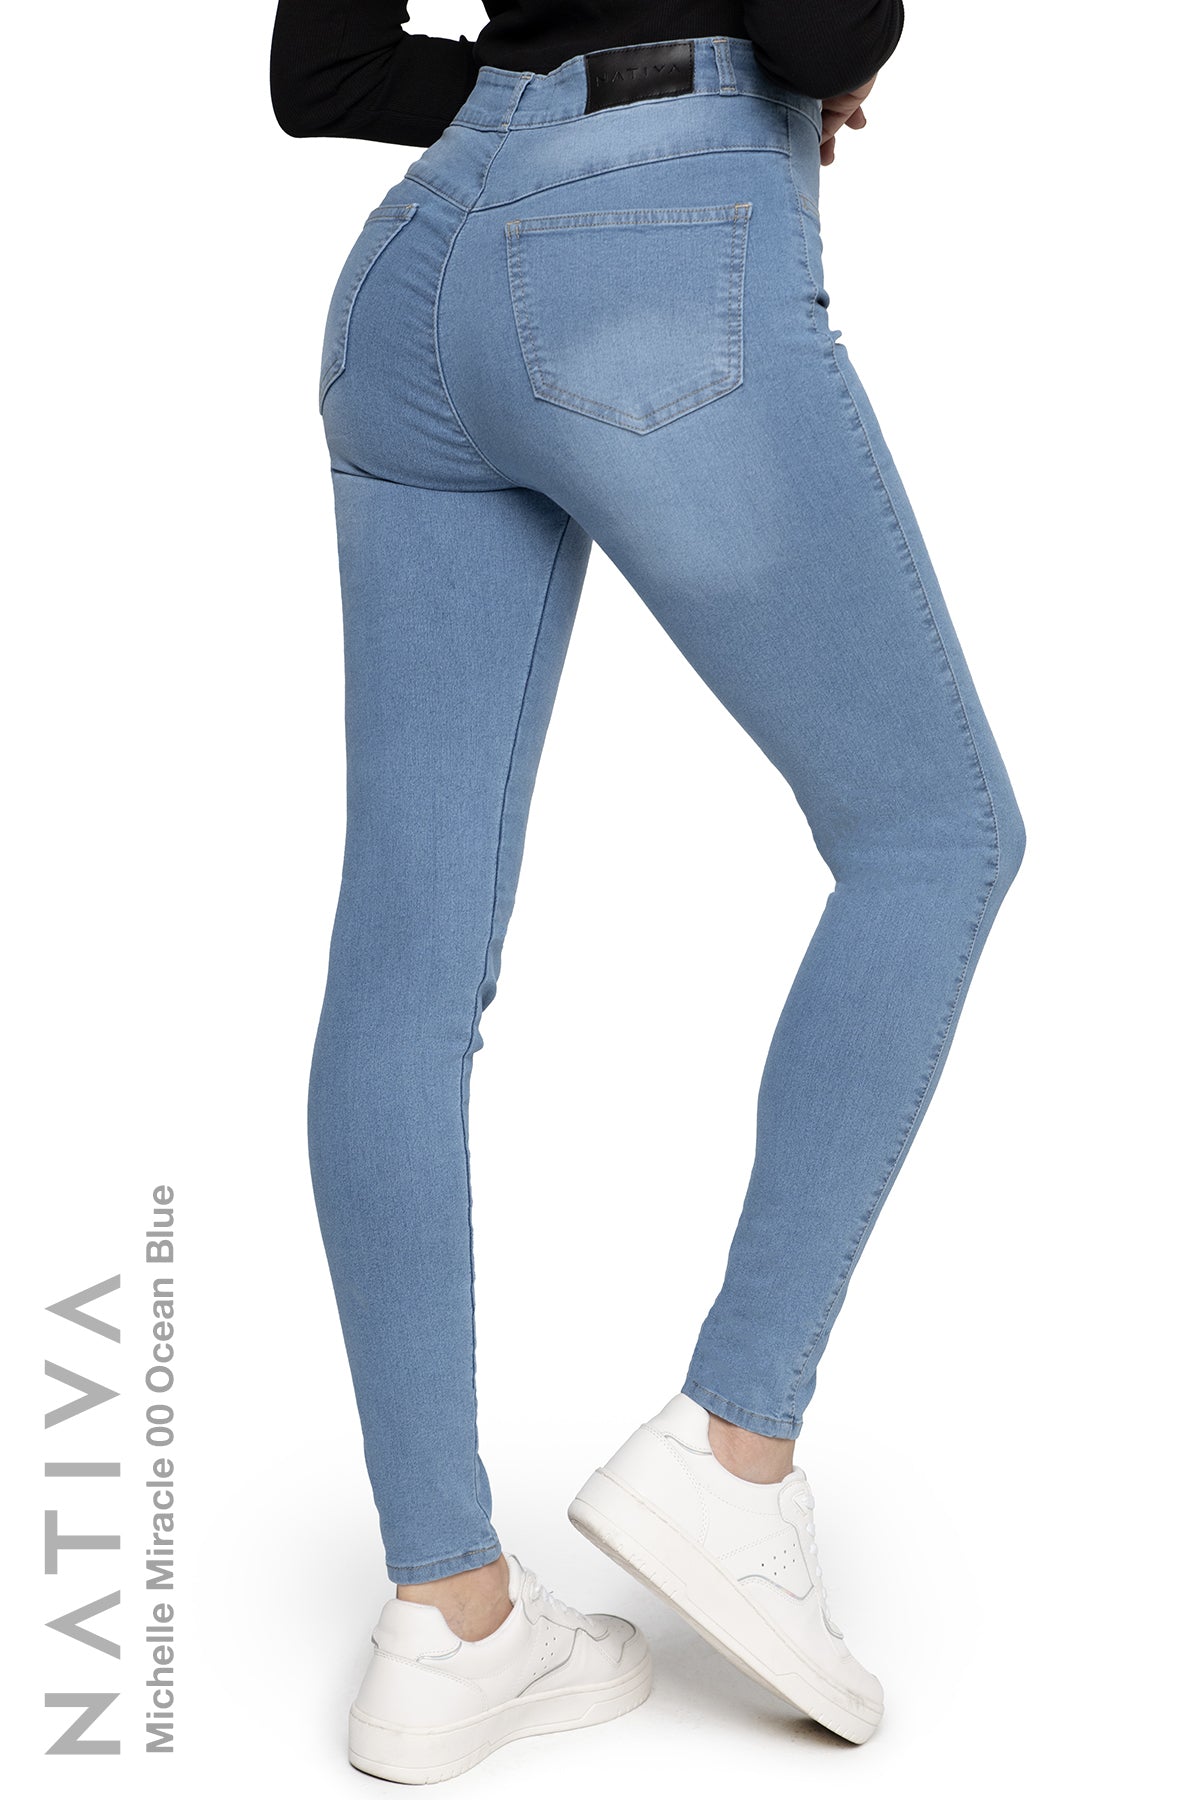 NATIVA, STRETCH JEANS. MICHELLE MIRACLE 00 OCEAN BLUE, High Shaping Ca | Stretchjeans